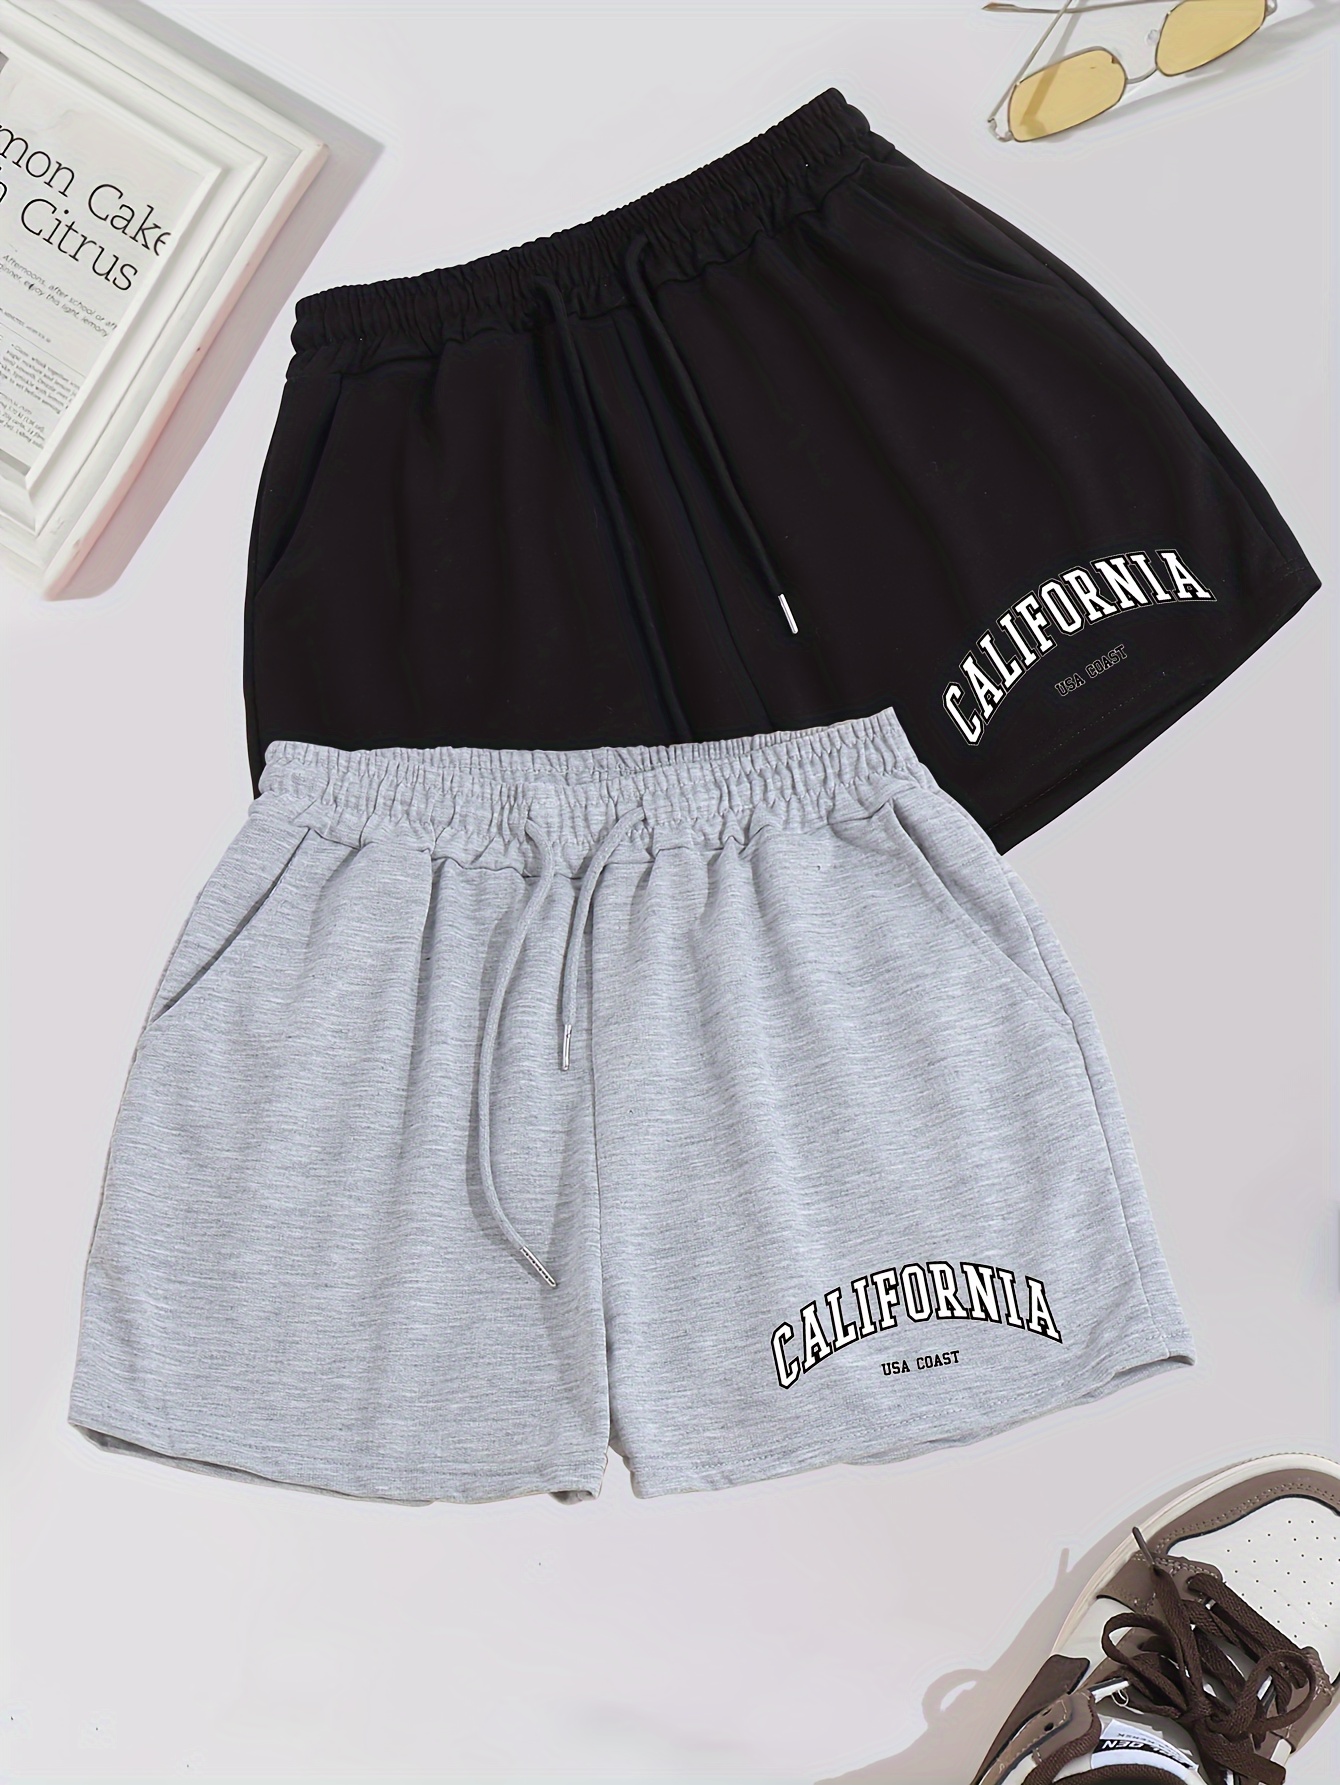 Designer Slim Fit Club Vest Booty Shorts For Women With Printed Letters For  Women Perfect For Summer Parties And Casual Wear In From Cindaa01, $3.85